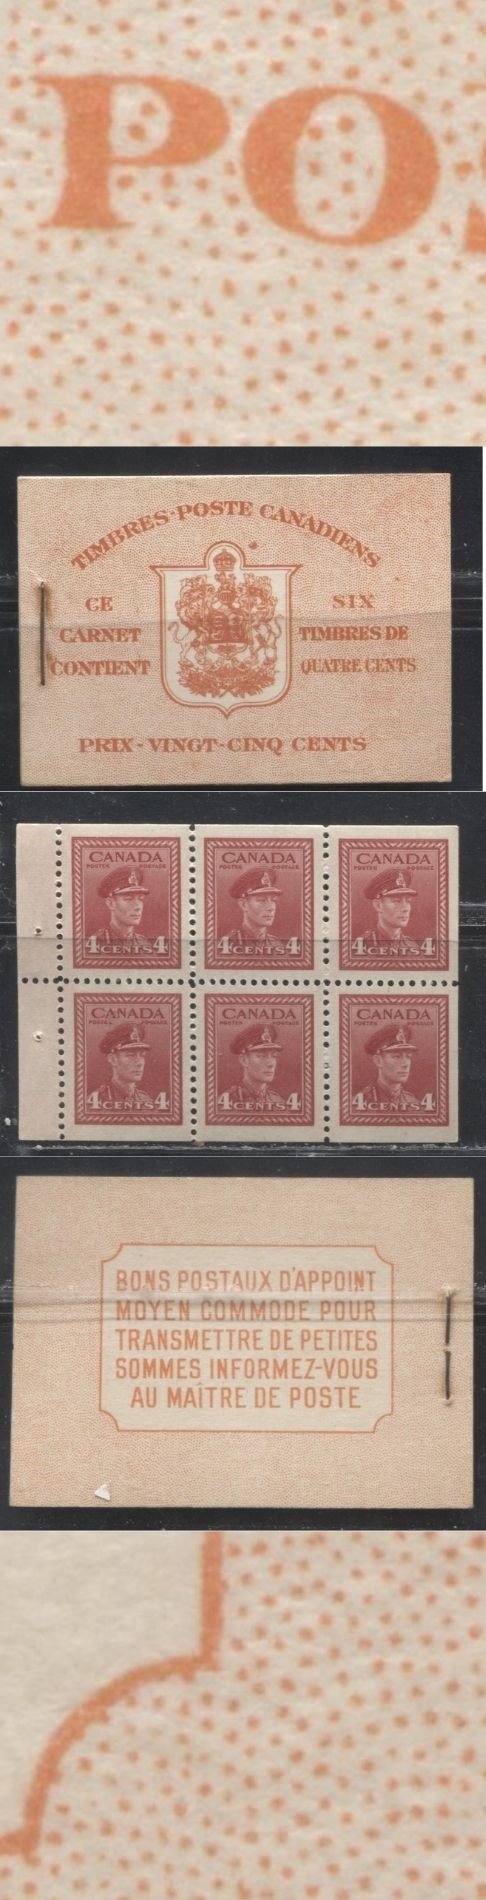 Lot 82 Canada #BK36d 1942-1949 War Issue,Type II,  Complete 25¢ French Booklet, 1 Pane of 4c Carmine-Red, Dark Red-Orange Harris Front Cover IIr, Back Cover Type Dii, 7c and 6c Rate Page